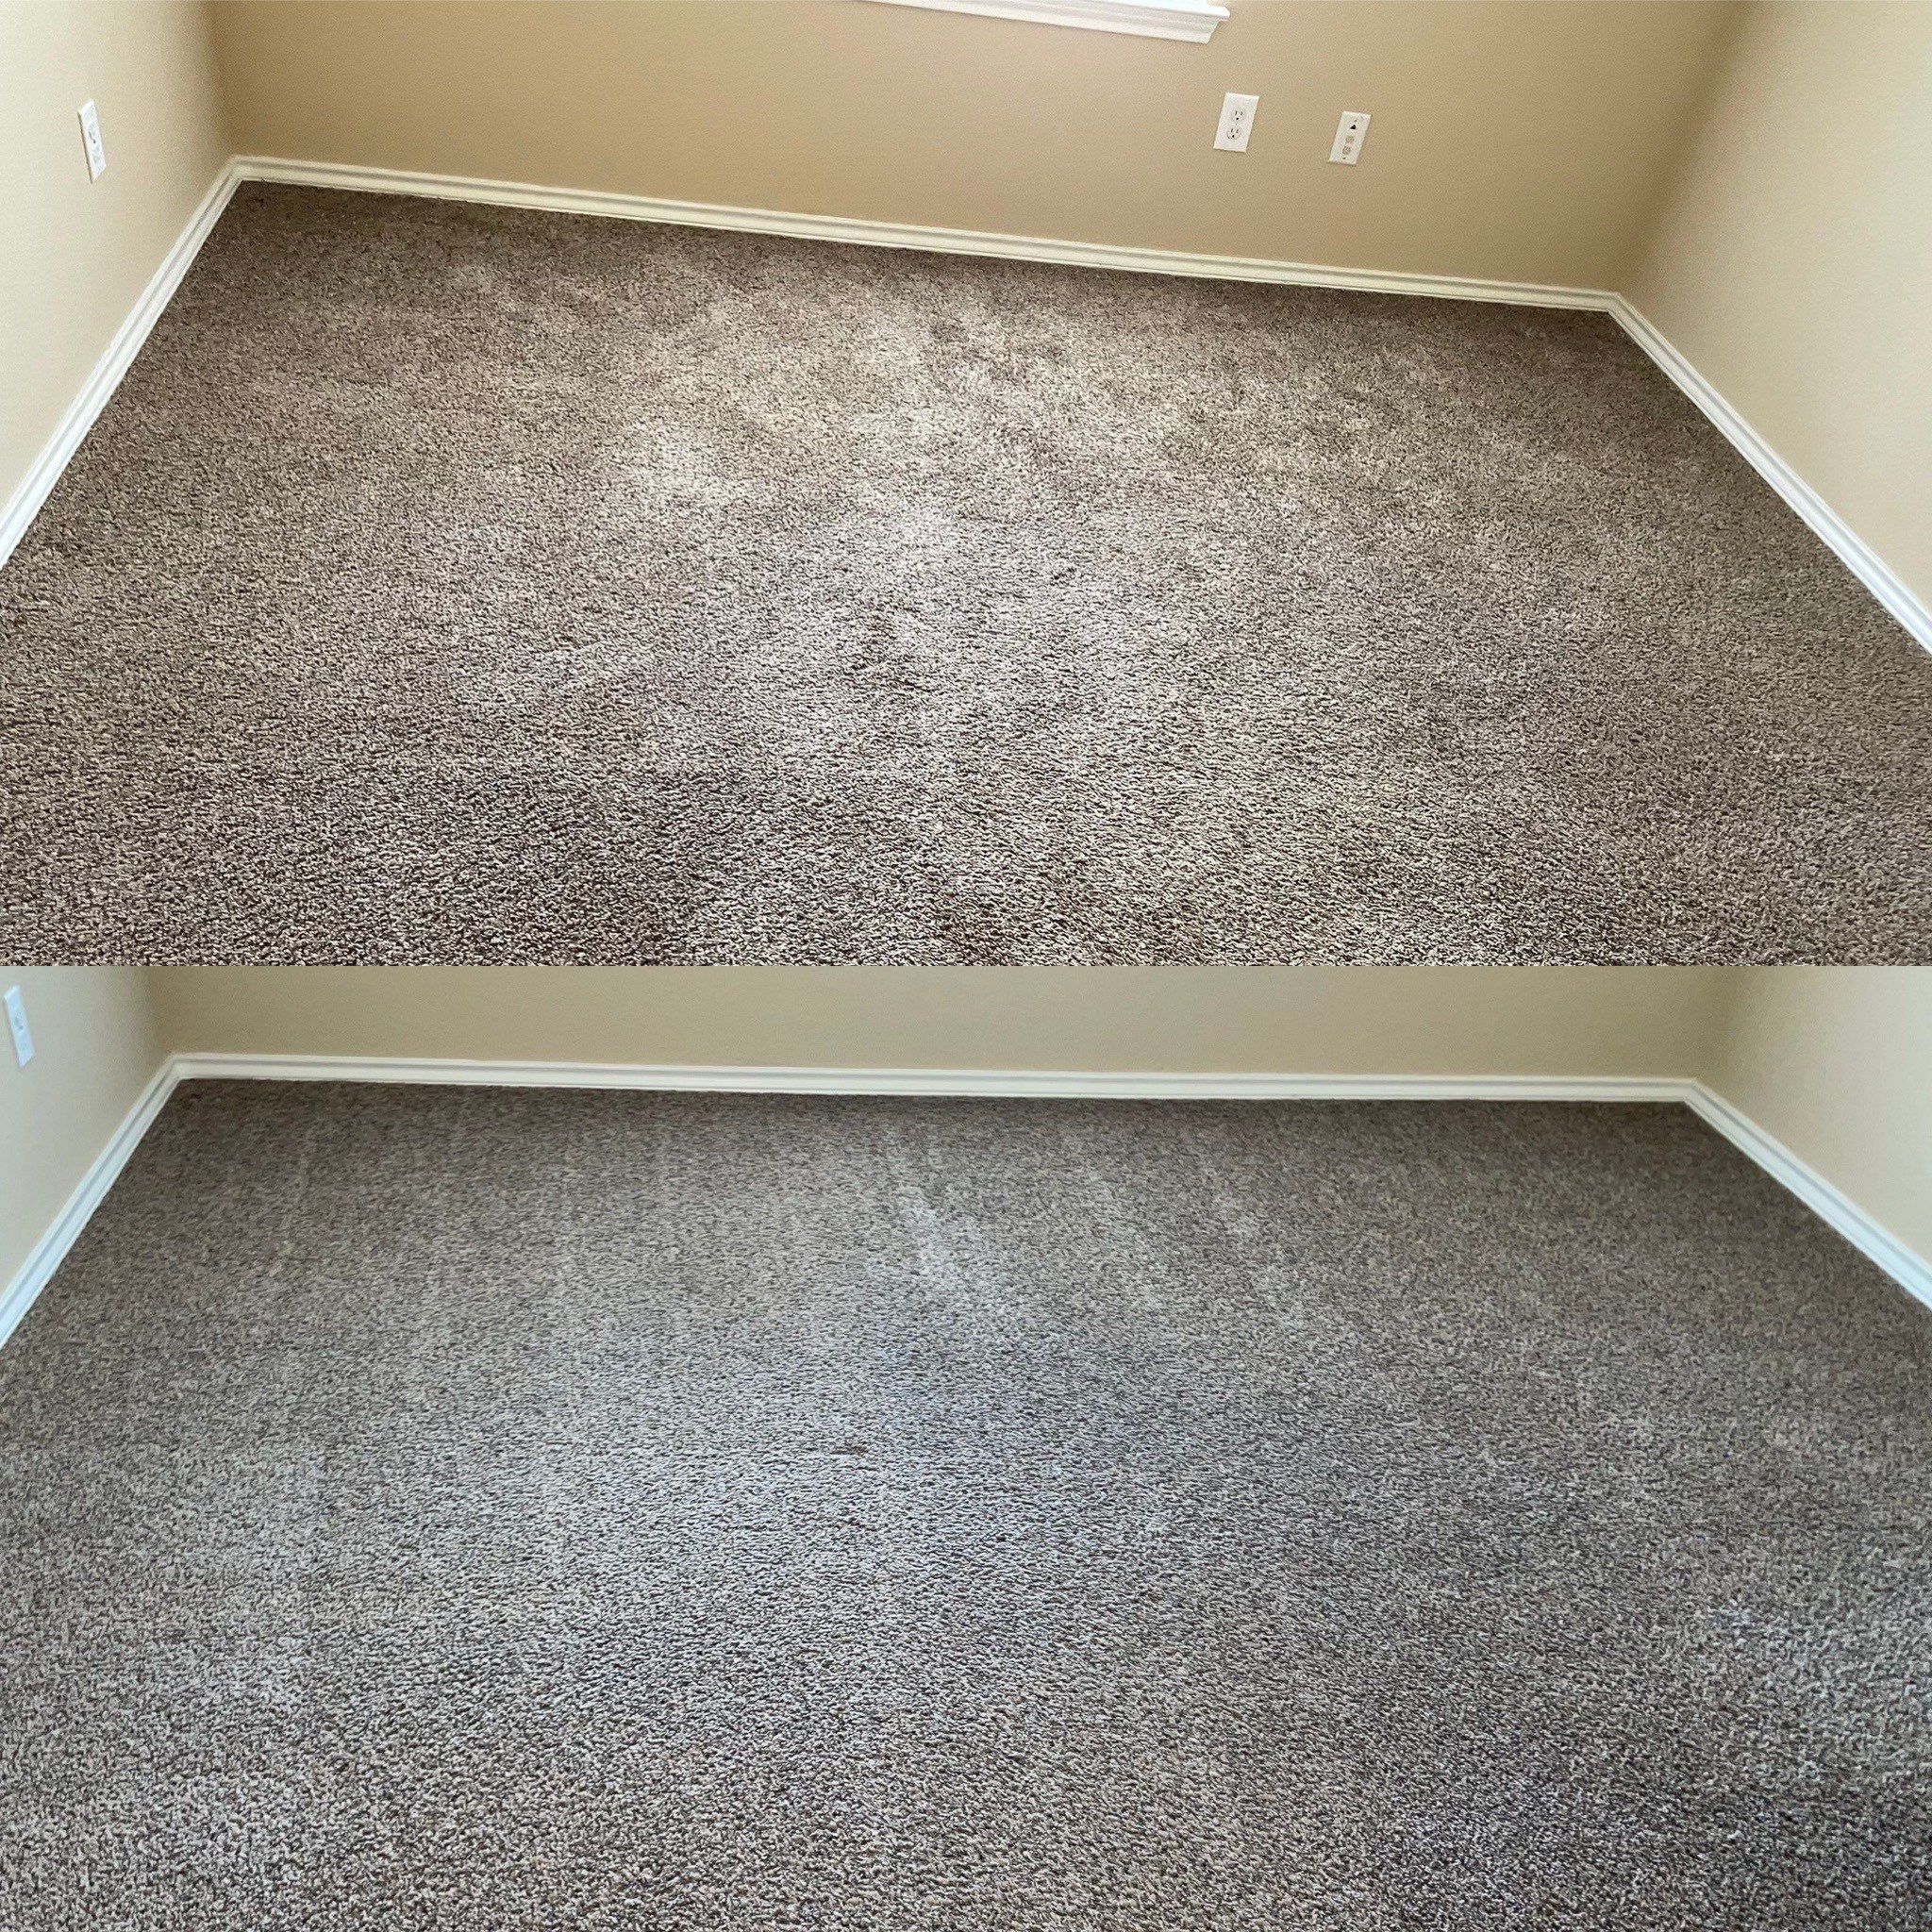 carpet cleaning before and after deep cleaning removal of dirt and stains from carpet fibers restoring appearance